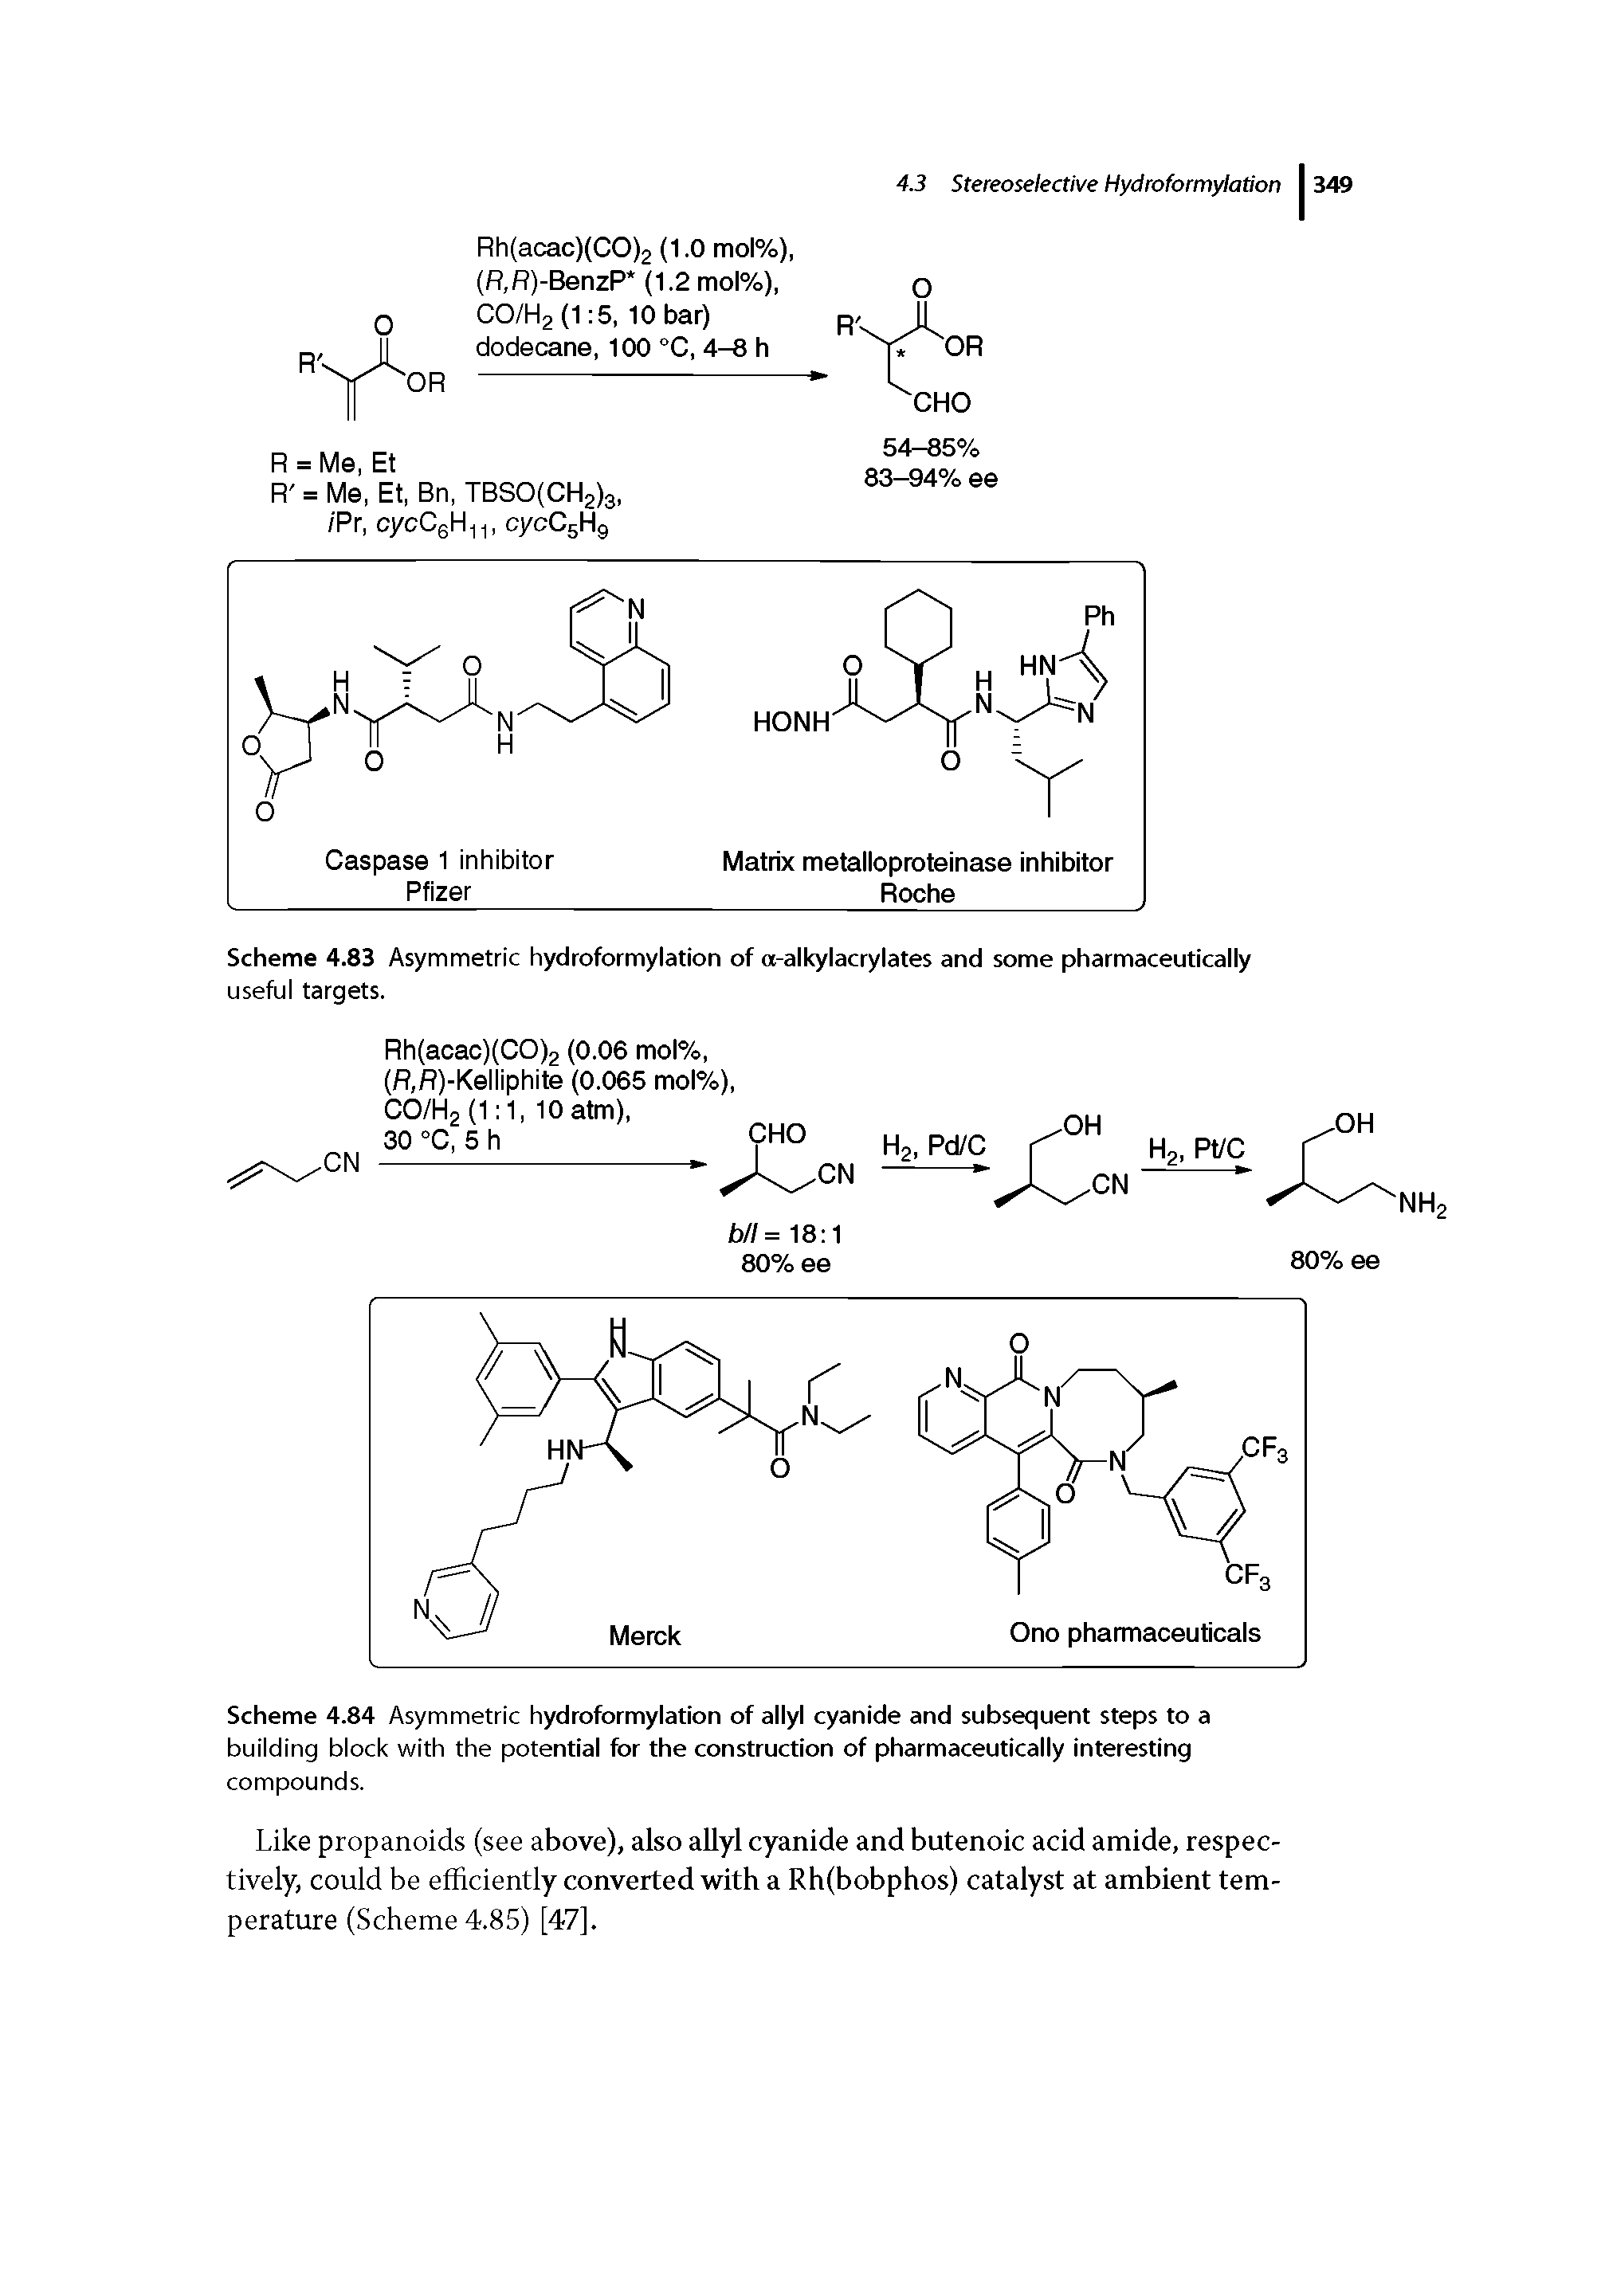 Scheme 4.84 Asymmetric hydroformylation of allyl cyanide and subsequent steps to a building block with the potential for the construction of pharmaceutically interesting compounds.